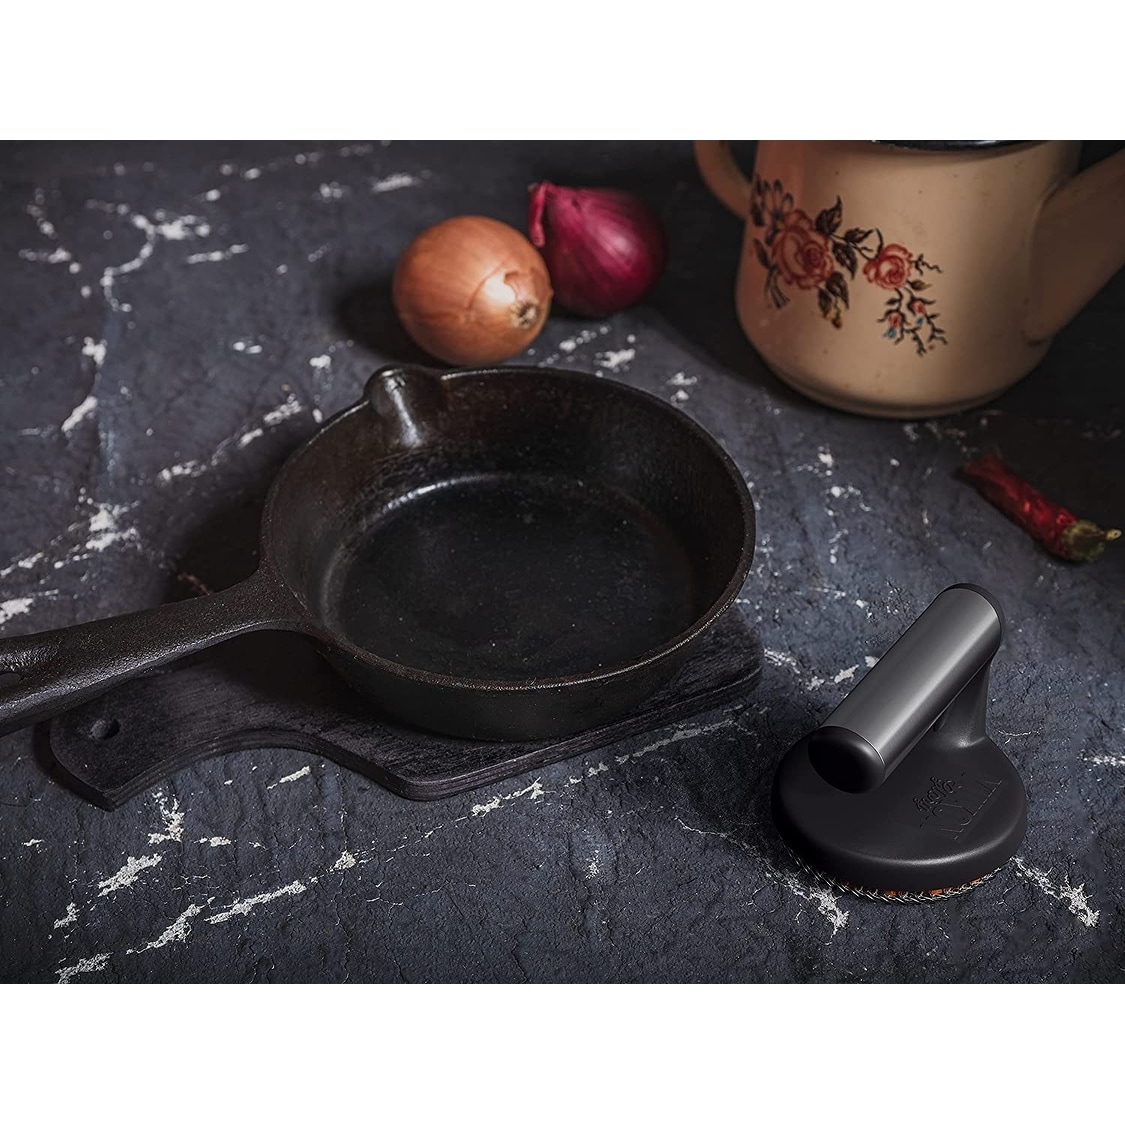 https://ak1.ostkcdn.com/images/products/is/images/direct/ed7173d15d5cbaf78cc5b939ed5984cb4c7c2d5d/Yukon-Glory-Cast-Iron-Skillet-Cleaner-The-Cast-Iron-Scrubber-and-Grill-Brush-Perfect-for-Cleaning-Cast-Iron-Cookware.jpg